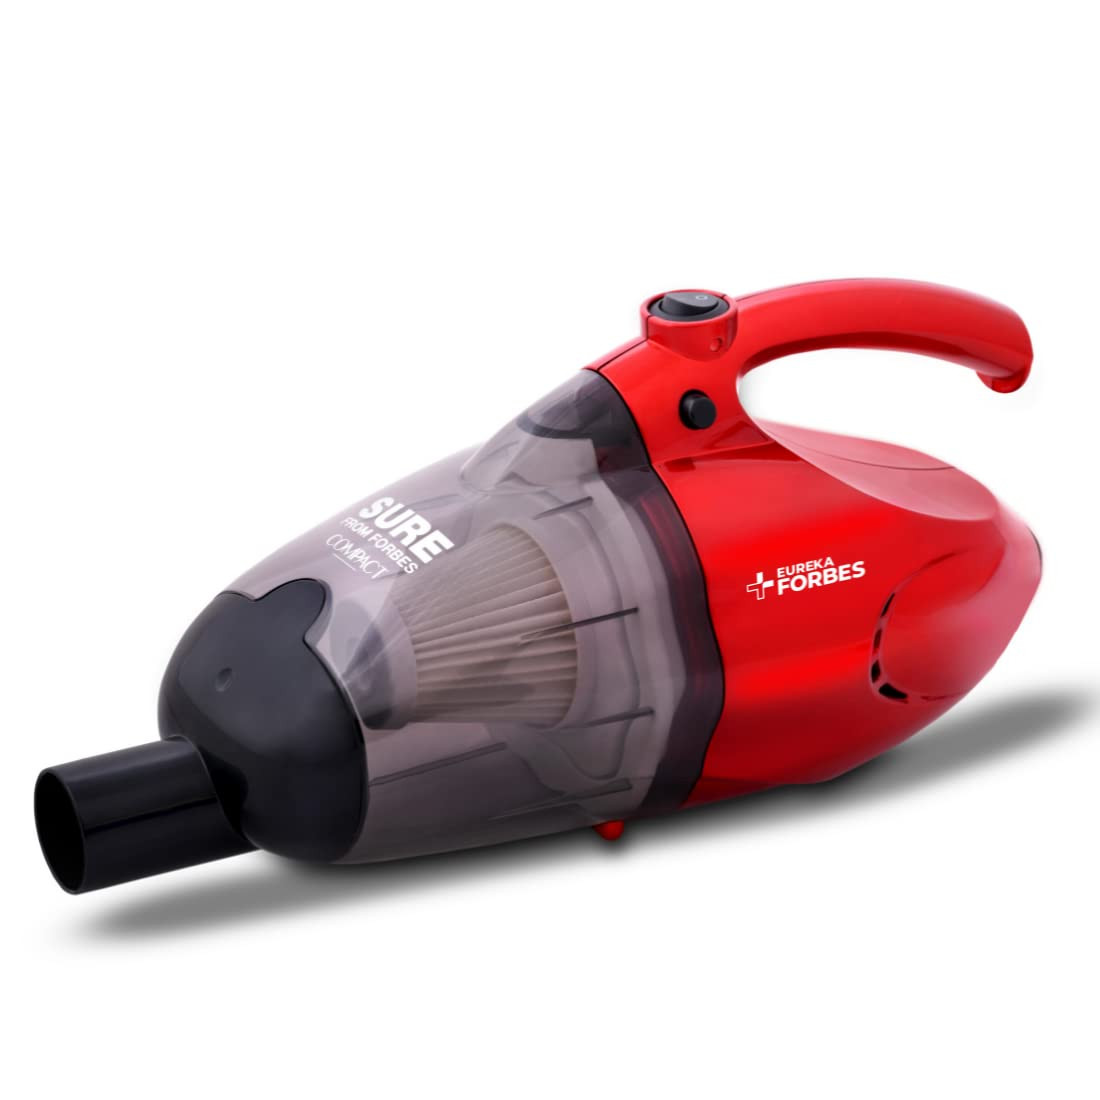 Eureka Forbes Compact 700 Watts Powerful Suction  Blower Vacuum Cleaner with Washable HEPA Filter  6 AccessoriesCompact1 Year WarrantyLight Weight  Easy to use Red  Black